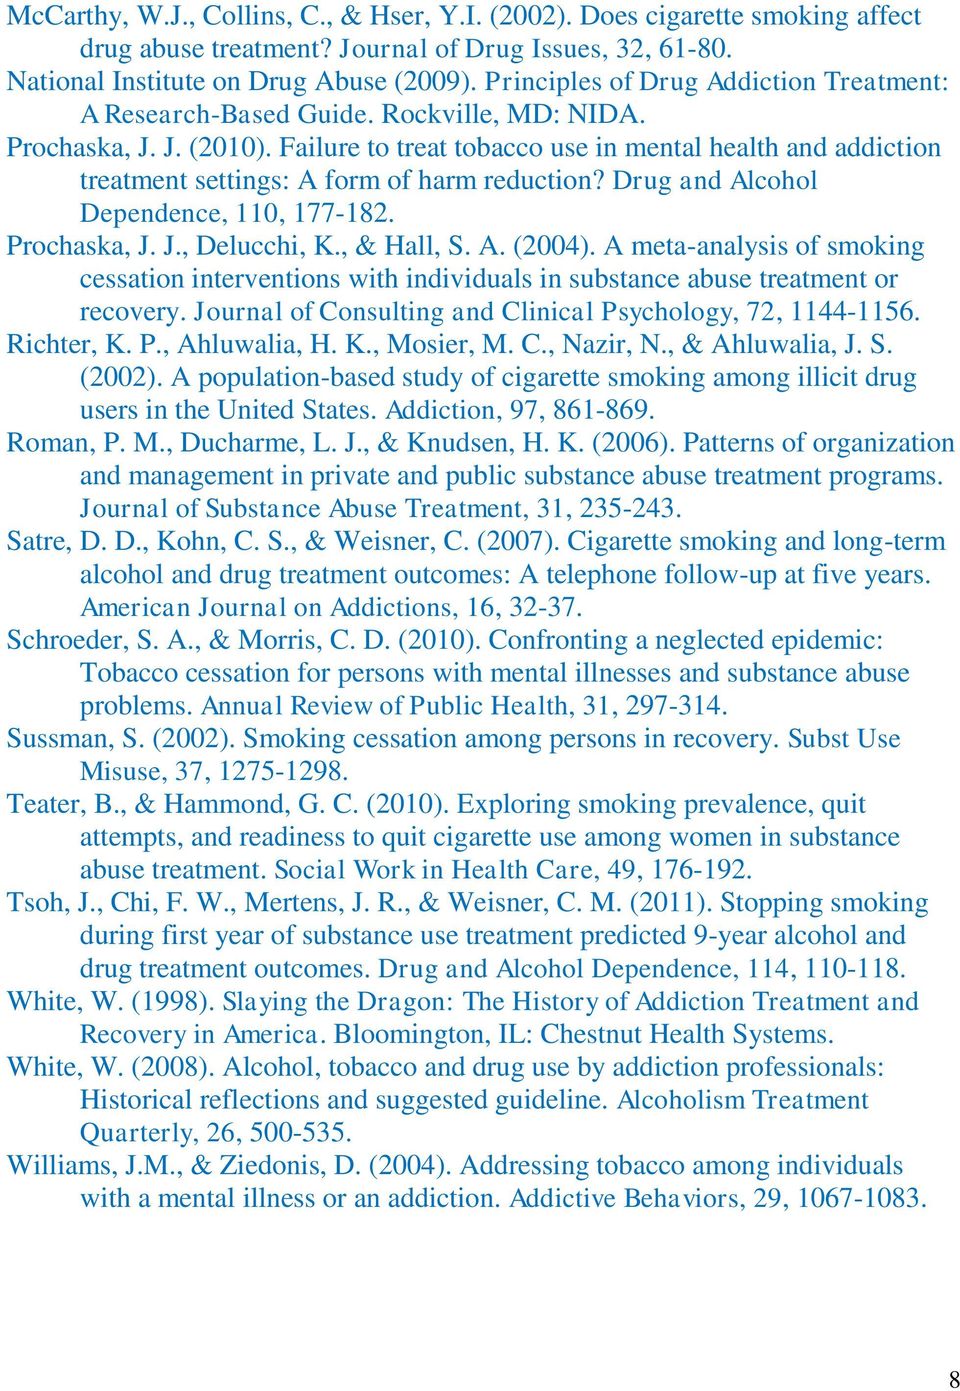 Failure to treat tobacco use in mental health and addiction treatment settings: A form of harm reduction? Drug and Alcohol Dependence, 110, 177-182. Prochaska, J. J., Delucchi, K., & Hall, S. A. (2004).